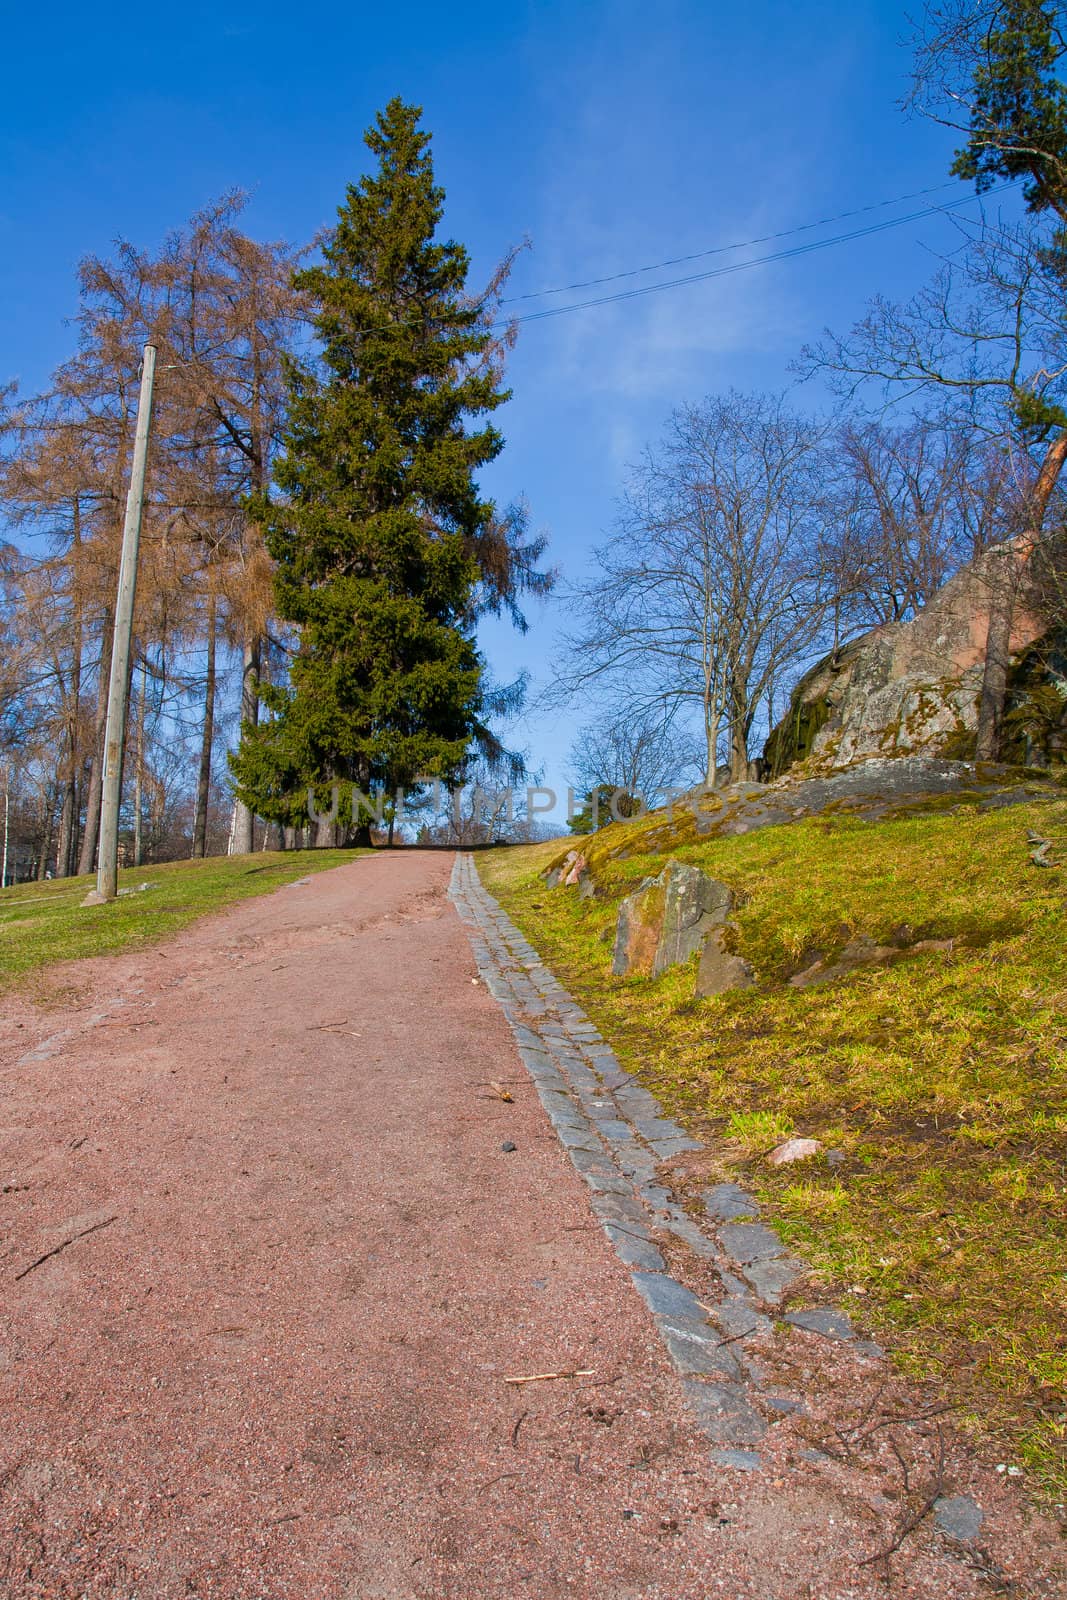 Road at a park spring time in Finland